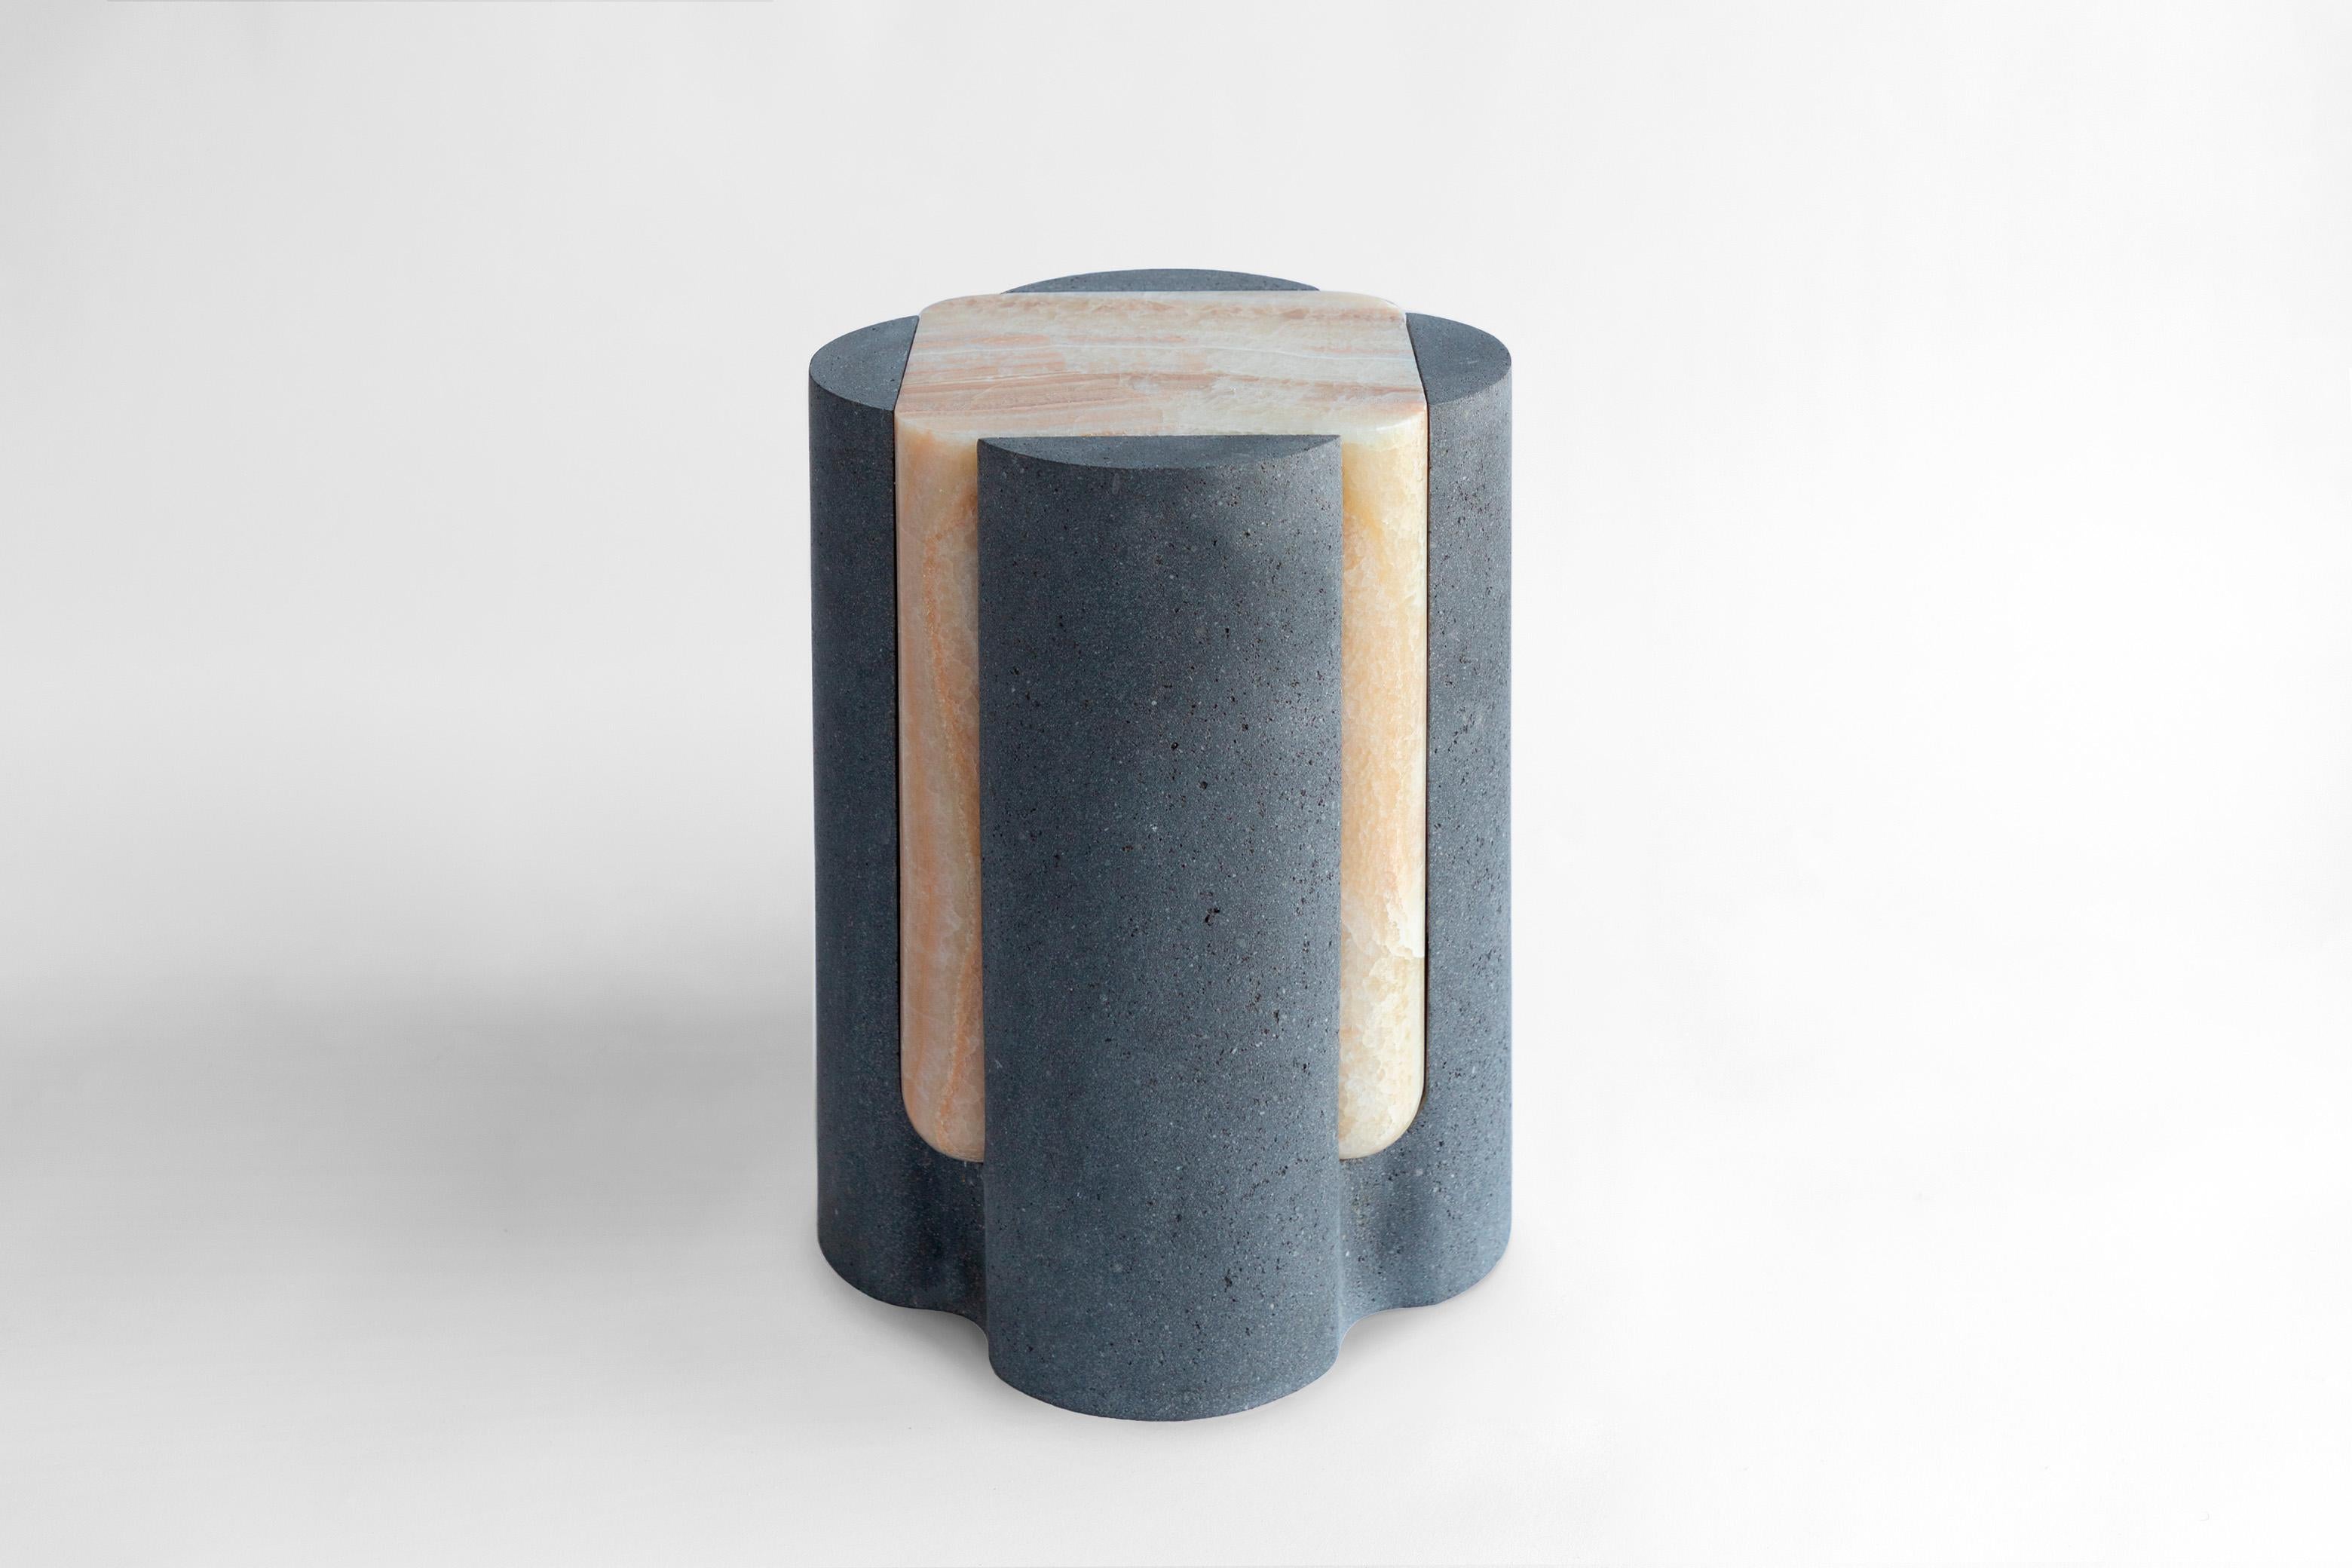 Contemporary Volcanic Shade II Stool/Table by Sten Studio, Represented by Tuleste Factory For Sale